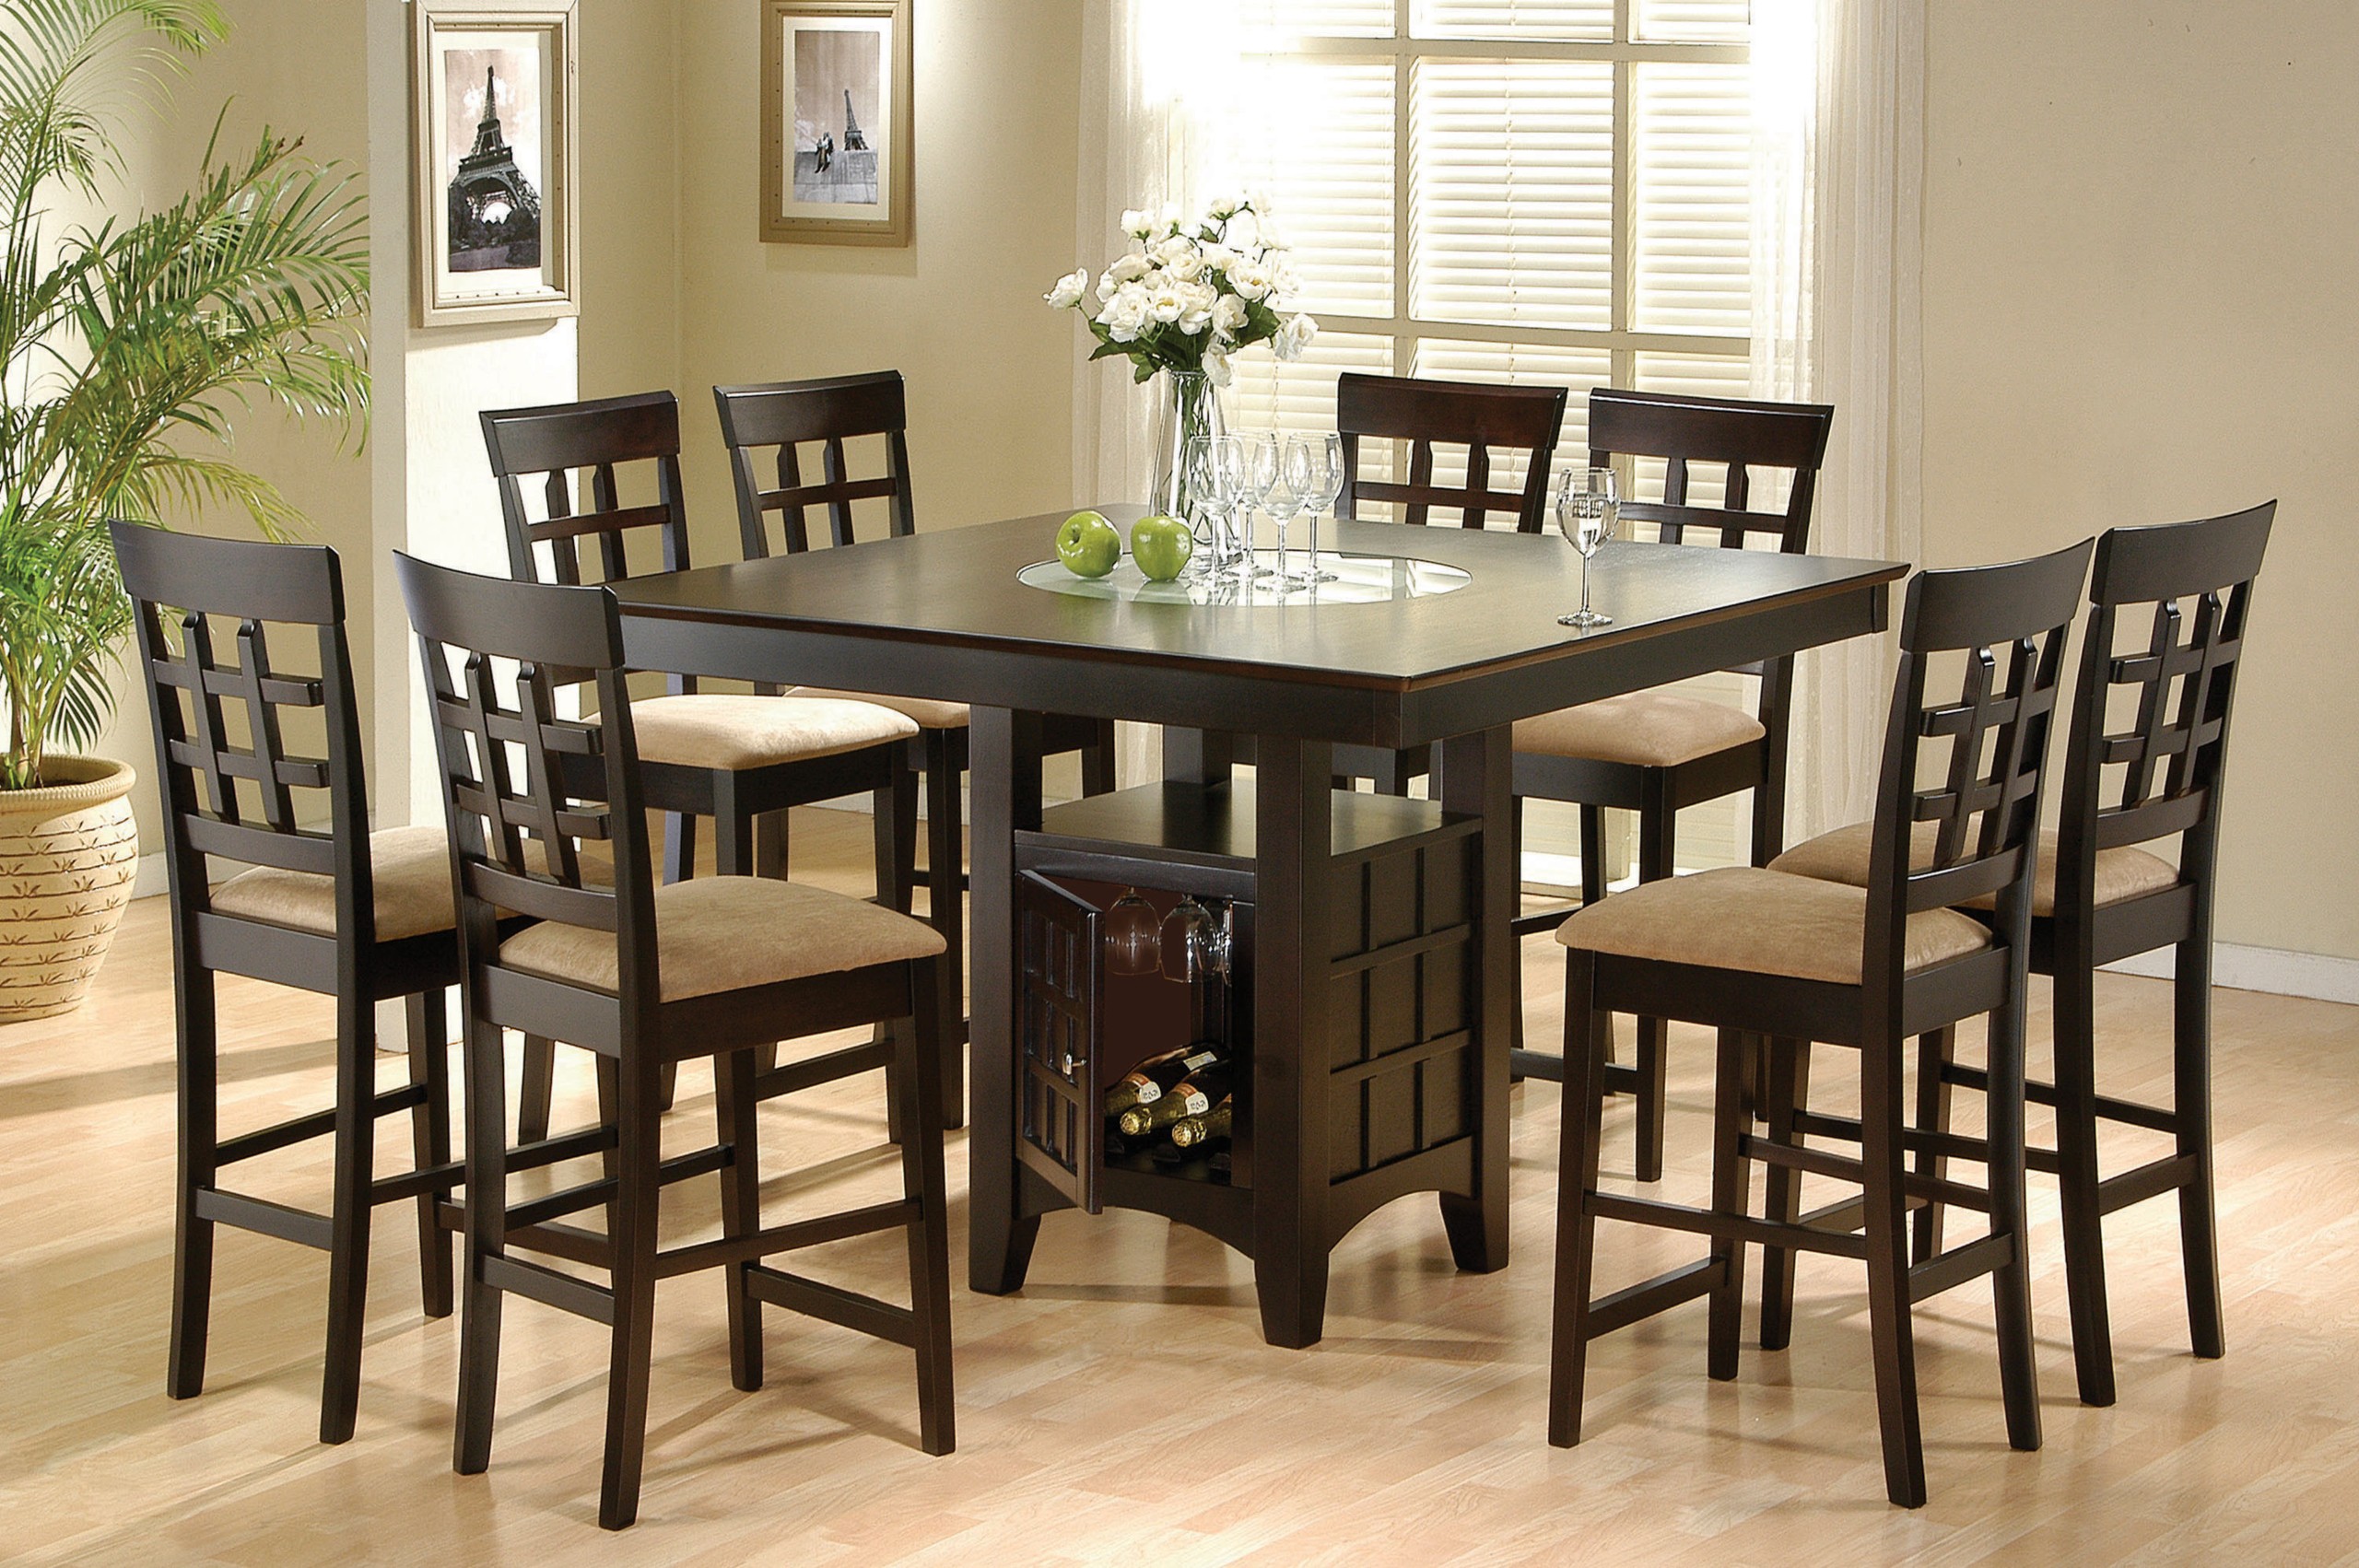 Square 8 Seater Dining Table 